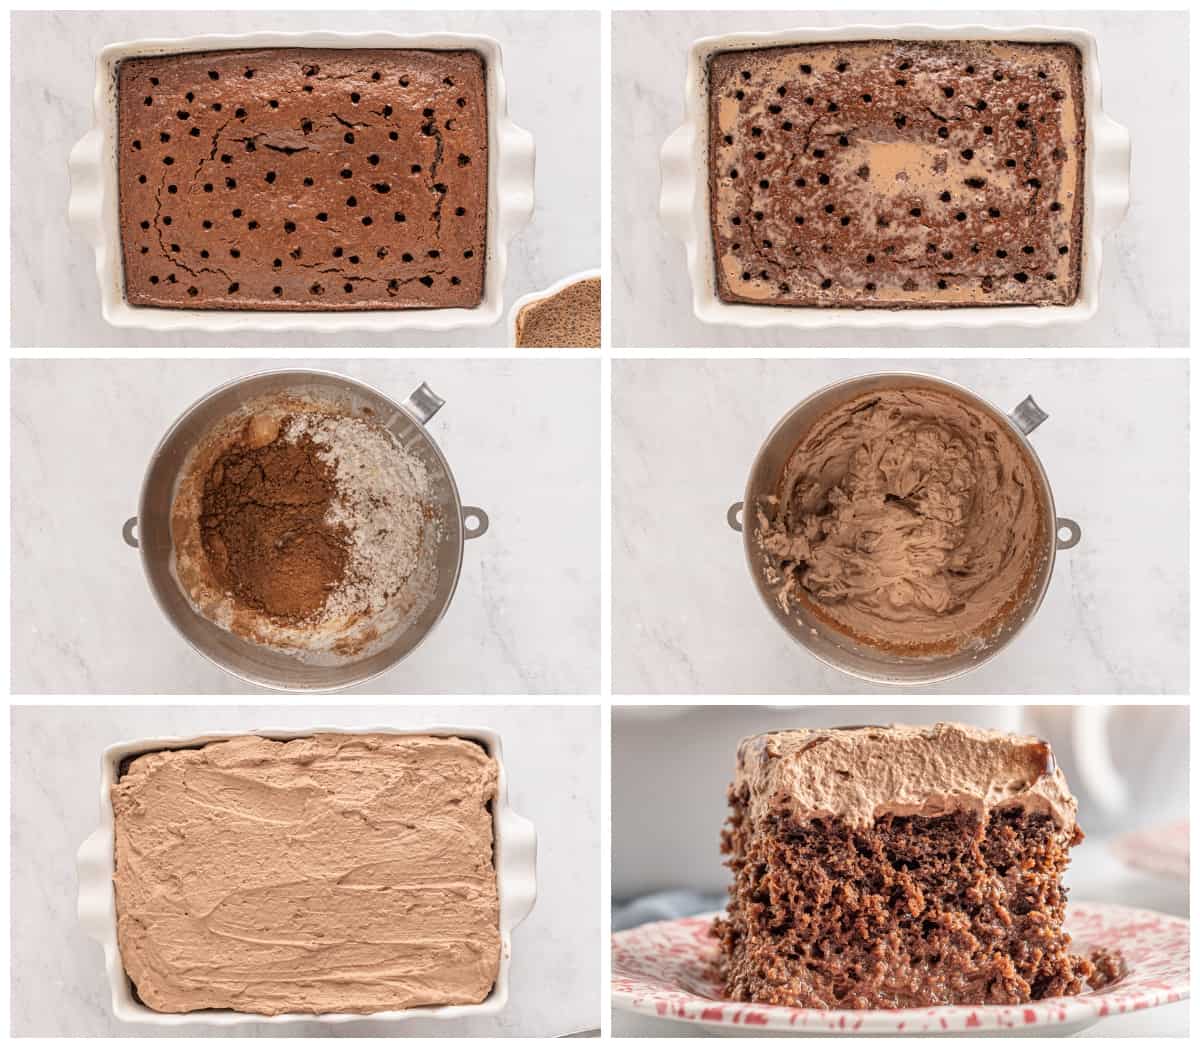 how to make chocolate tres leches cake step by step photo instructions